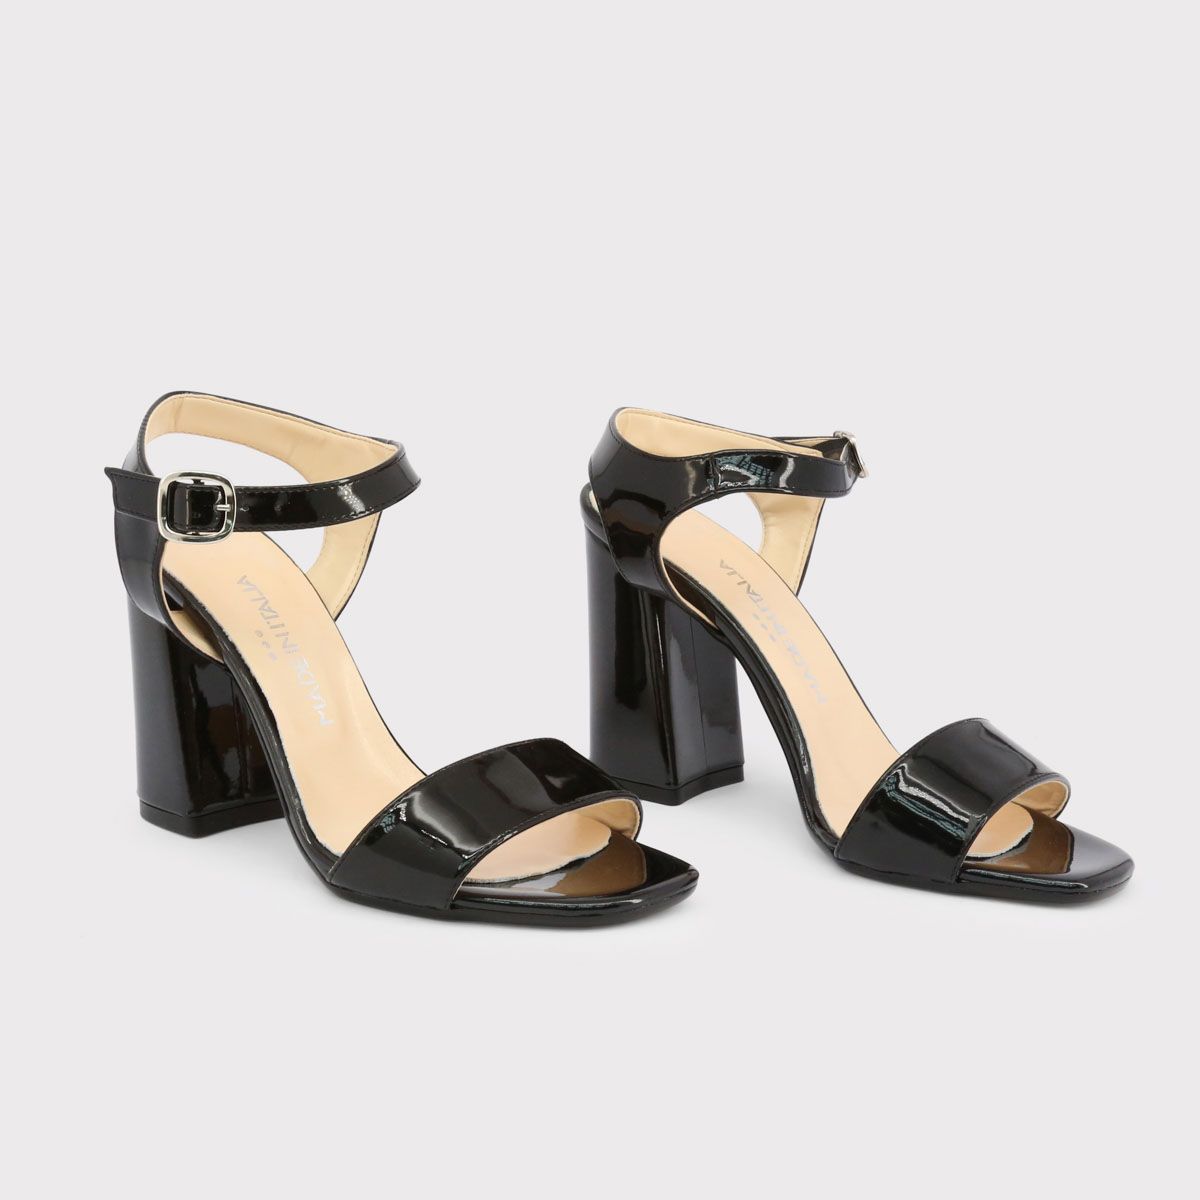 Made in: Italy <br> Collection: Spring/Summer <br> Gender: Woman <br> Type: Sandals <br> Upper: synthetic patent leather <br> Insole: leather <br> Sole: rubber <br> Heel height cm: 10 <br> Details: ankle strap, buckle